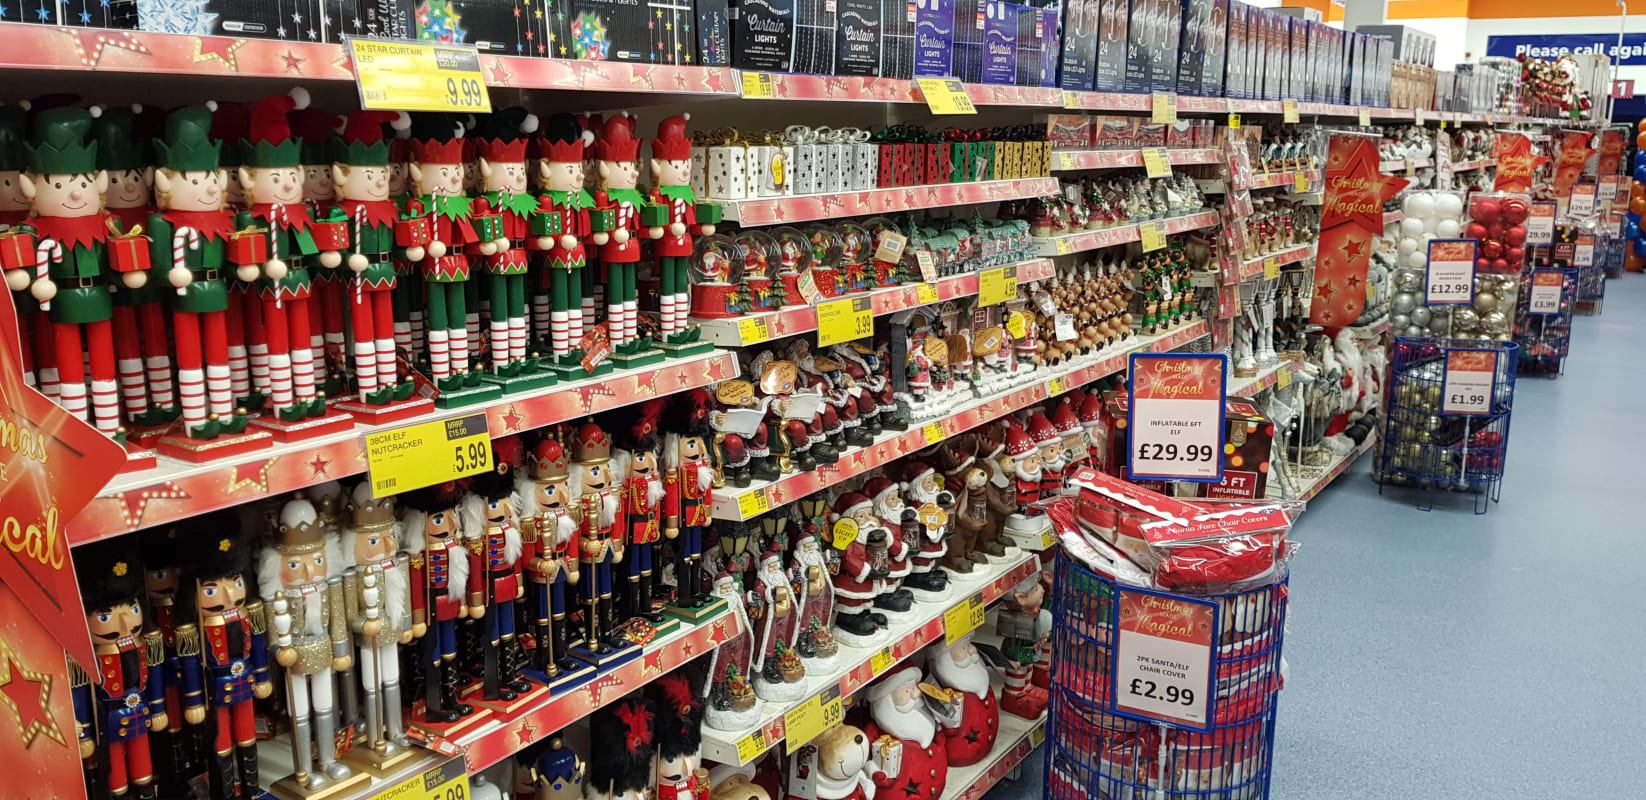 B&M's Shrewsbury store has plenty to offer customers, including a glittering range of gorgeous Christmas decorations.